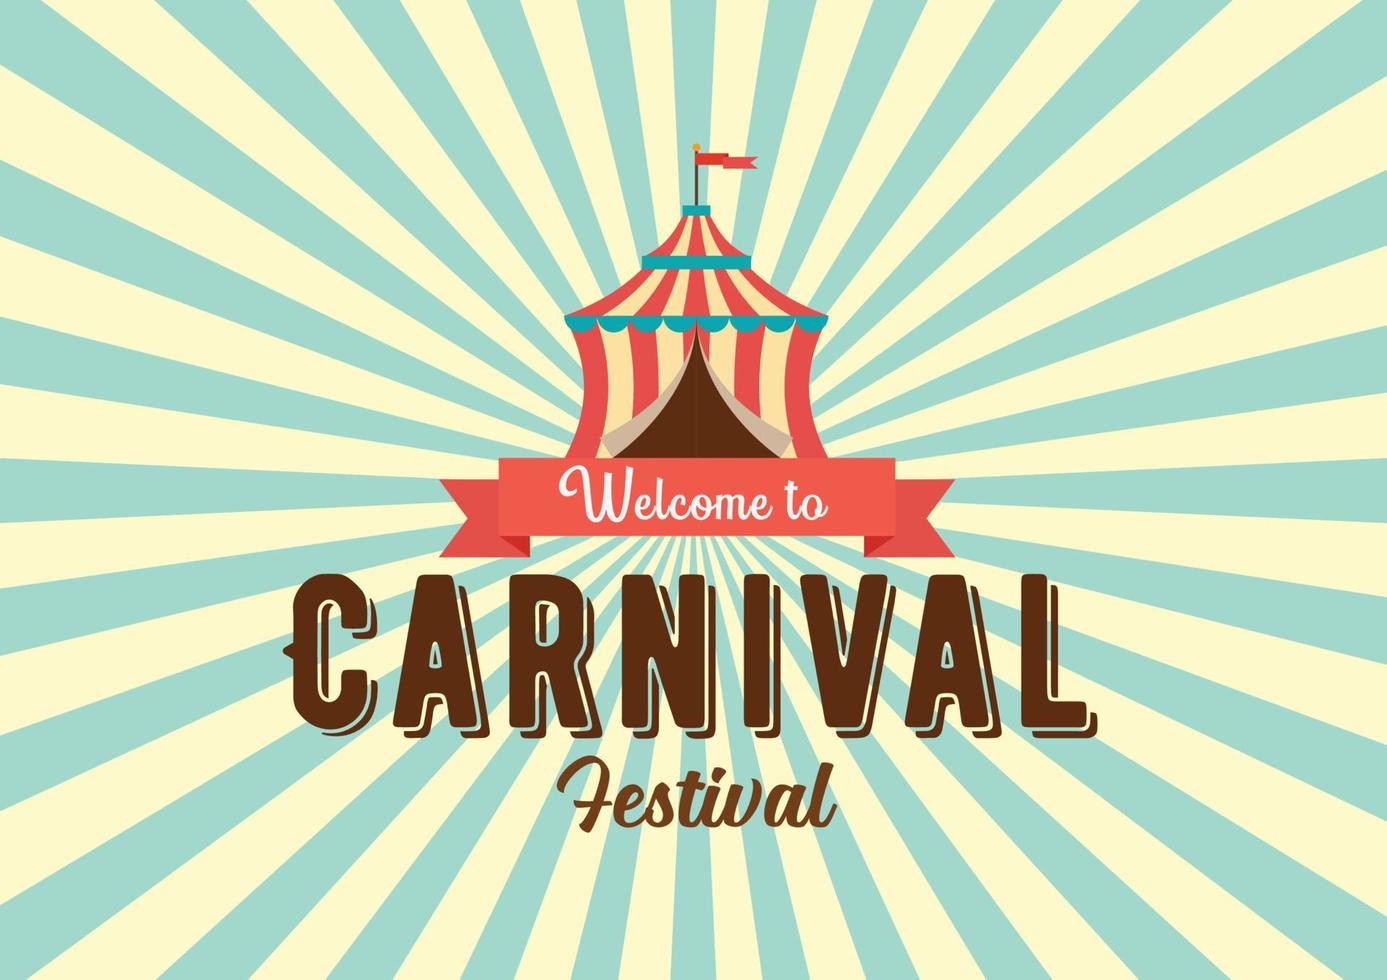 Welcome to Carnival festival banner vector